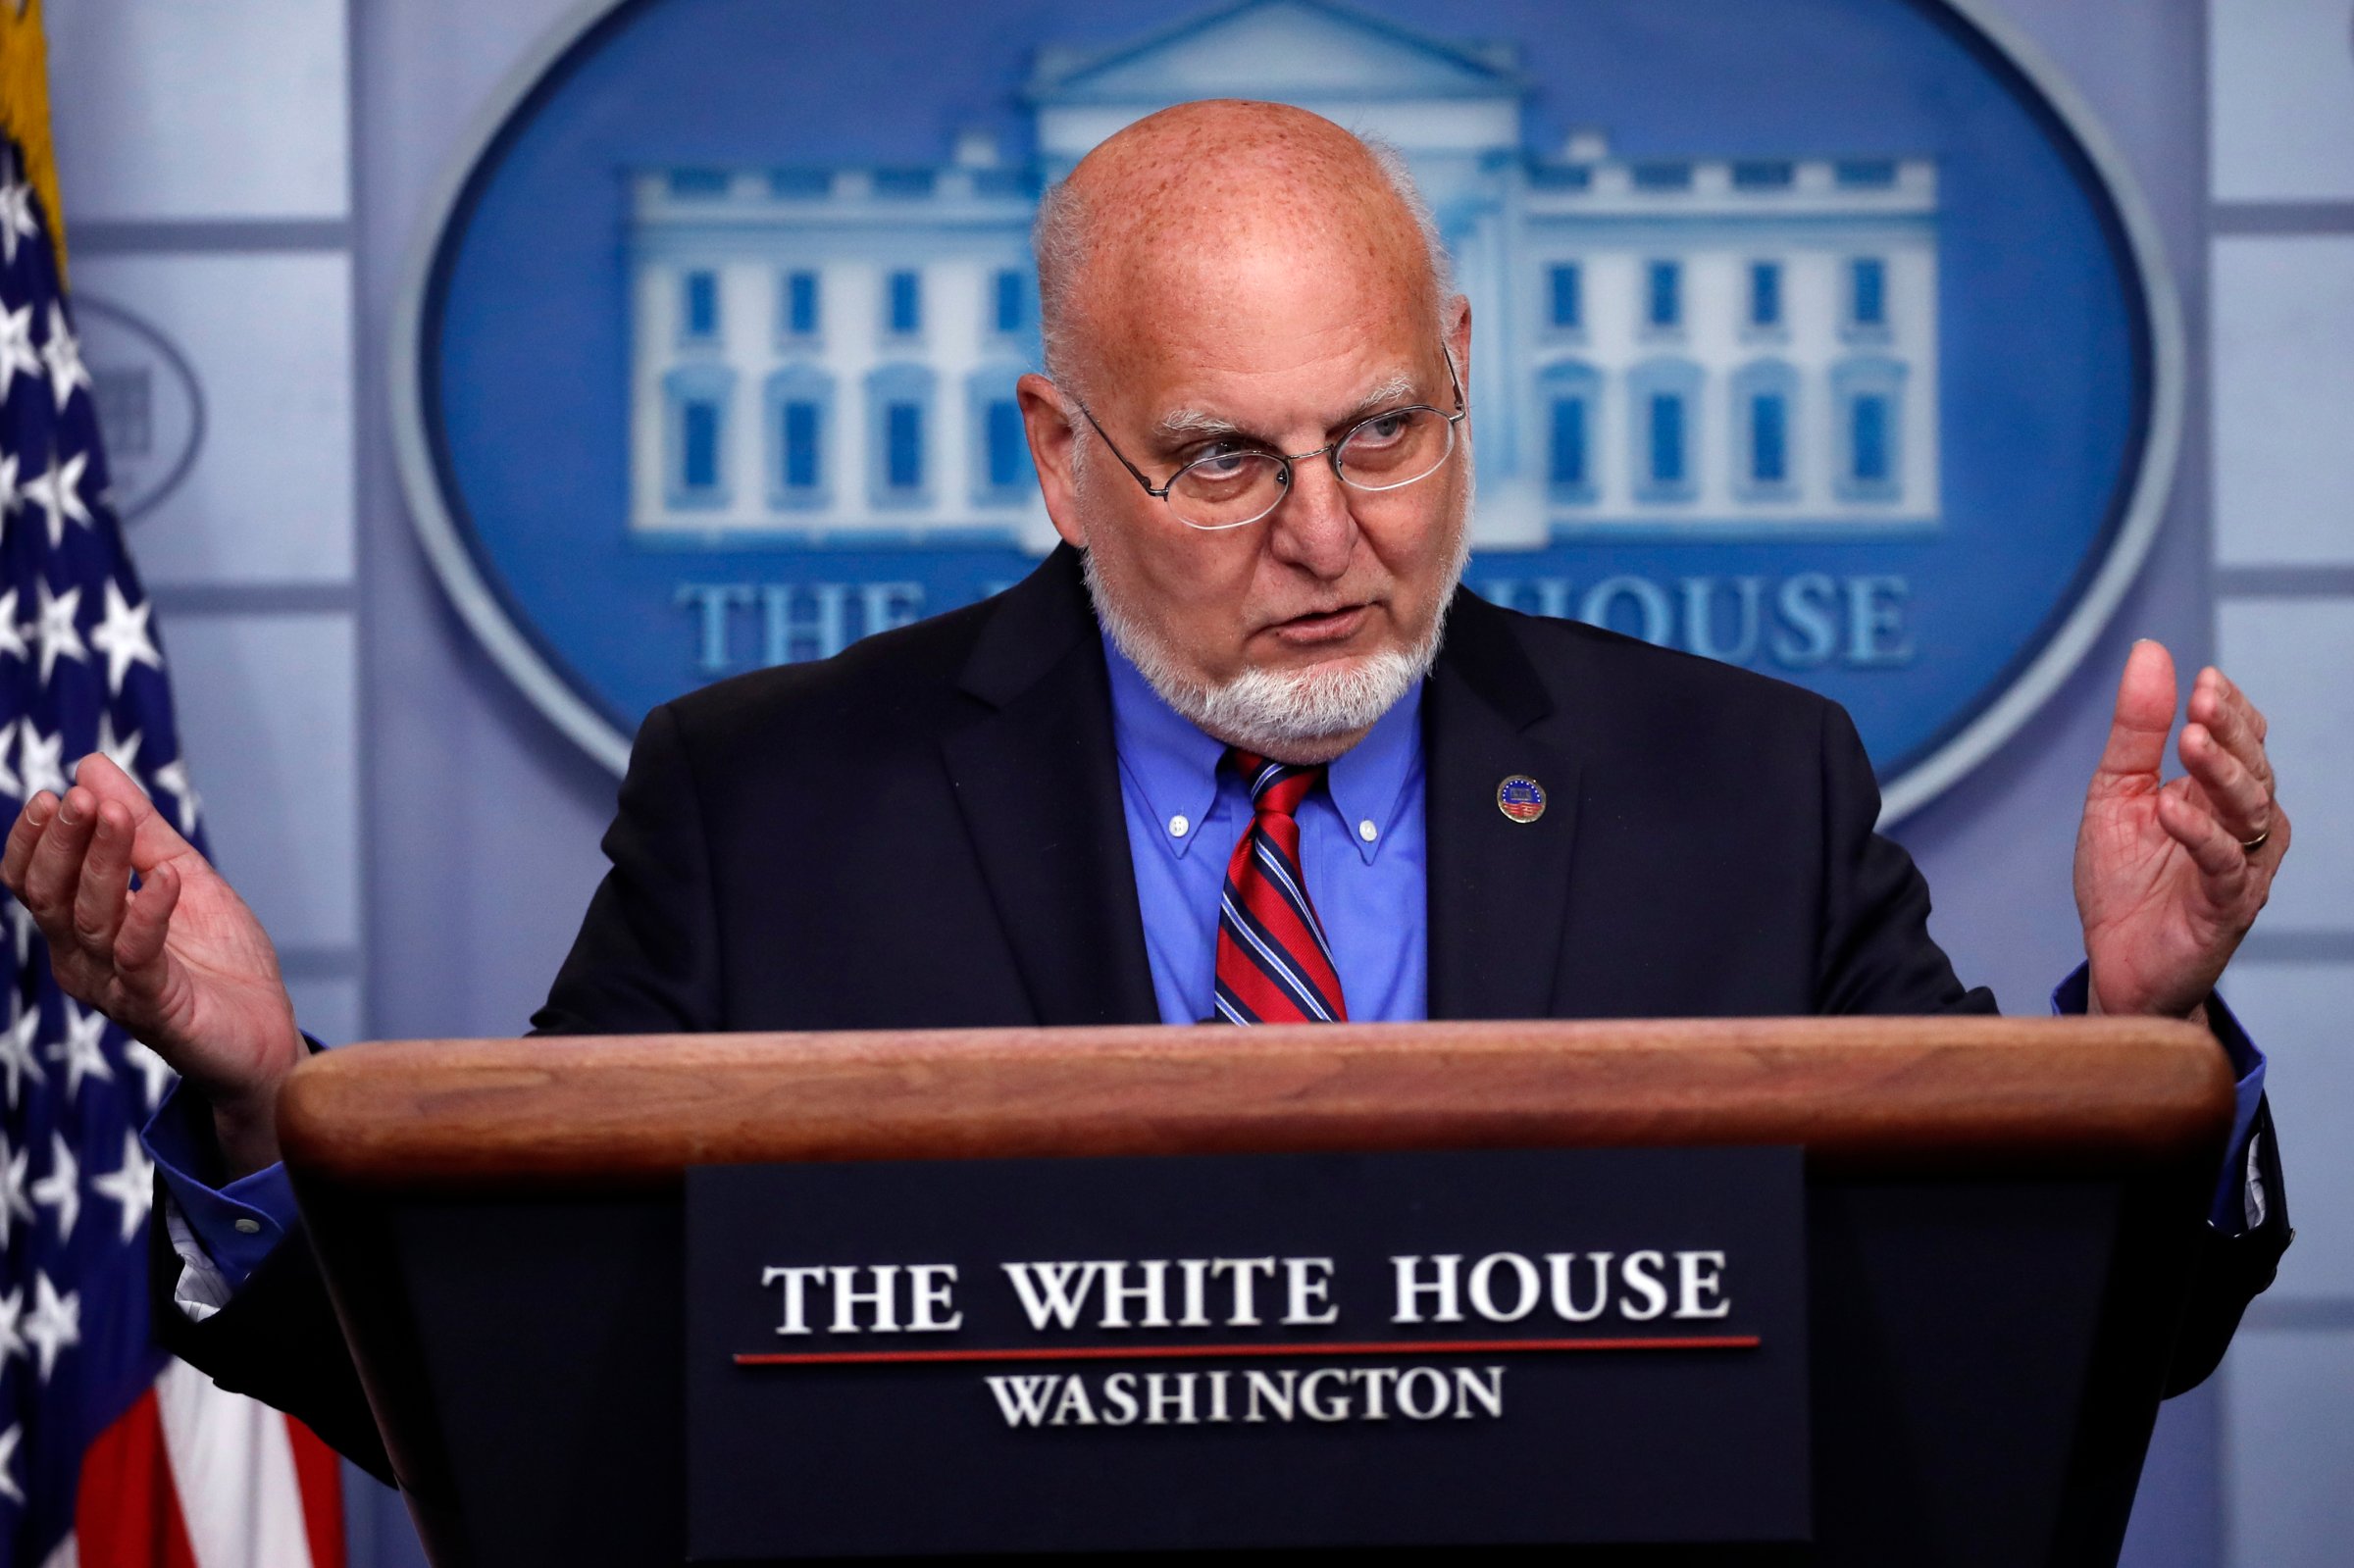 Dr. Robert Redfield, director of the Centers for Disease Control and Prevention, speaks about the coronavirus in the James Brady Press Briefing Room of the White House in Washington on April 22, 2020.